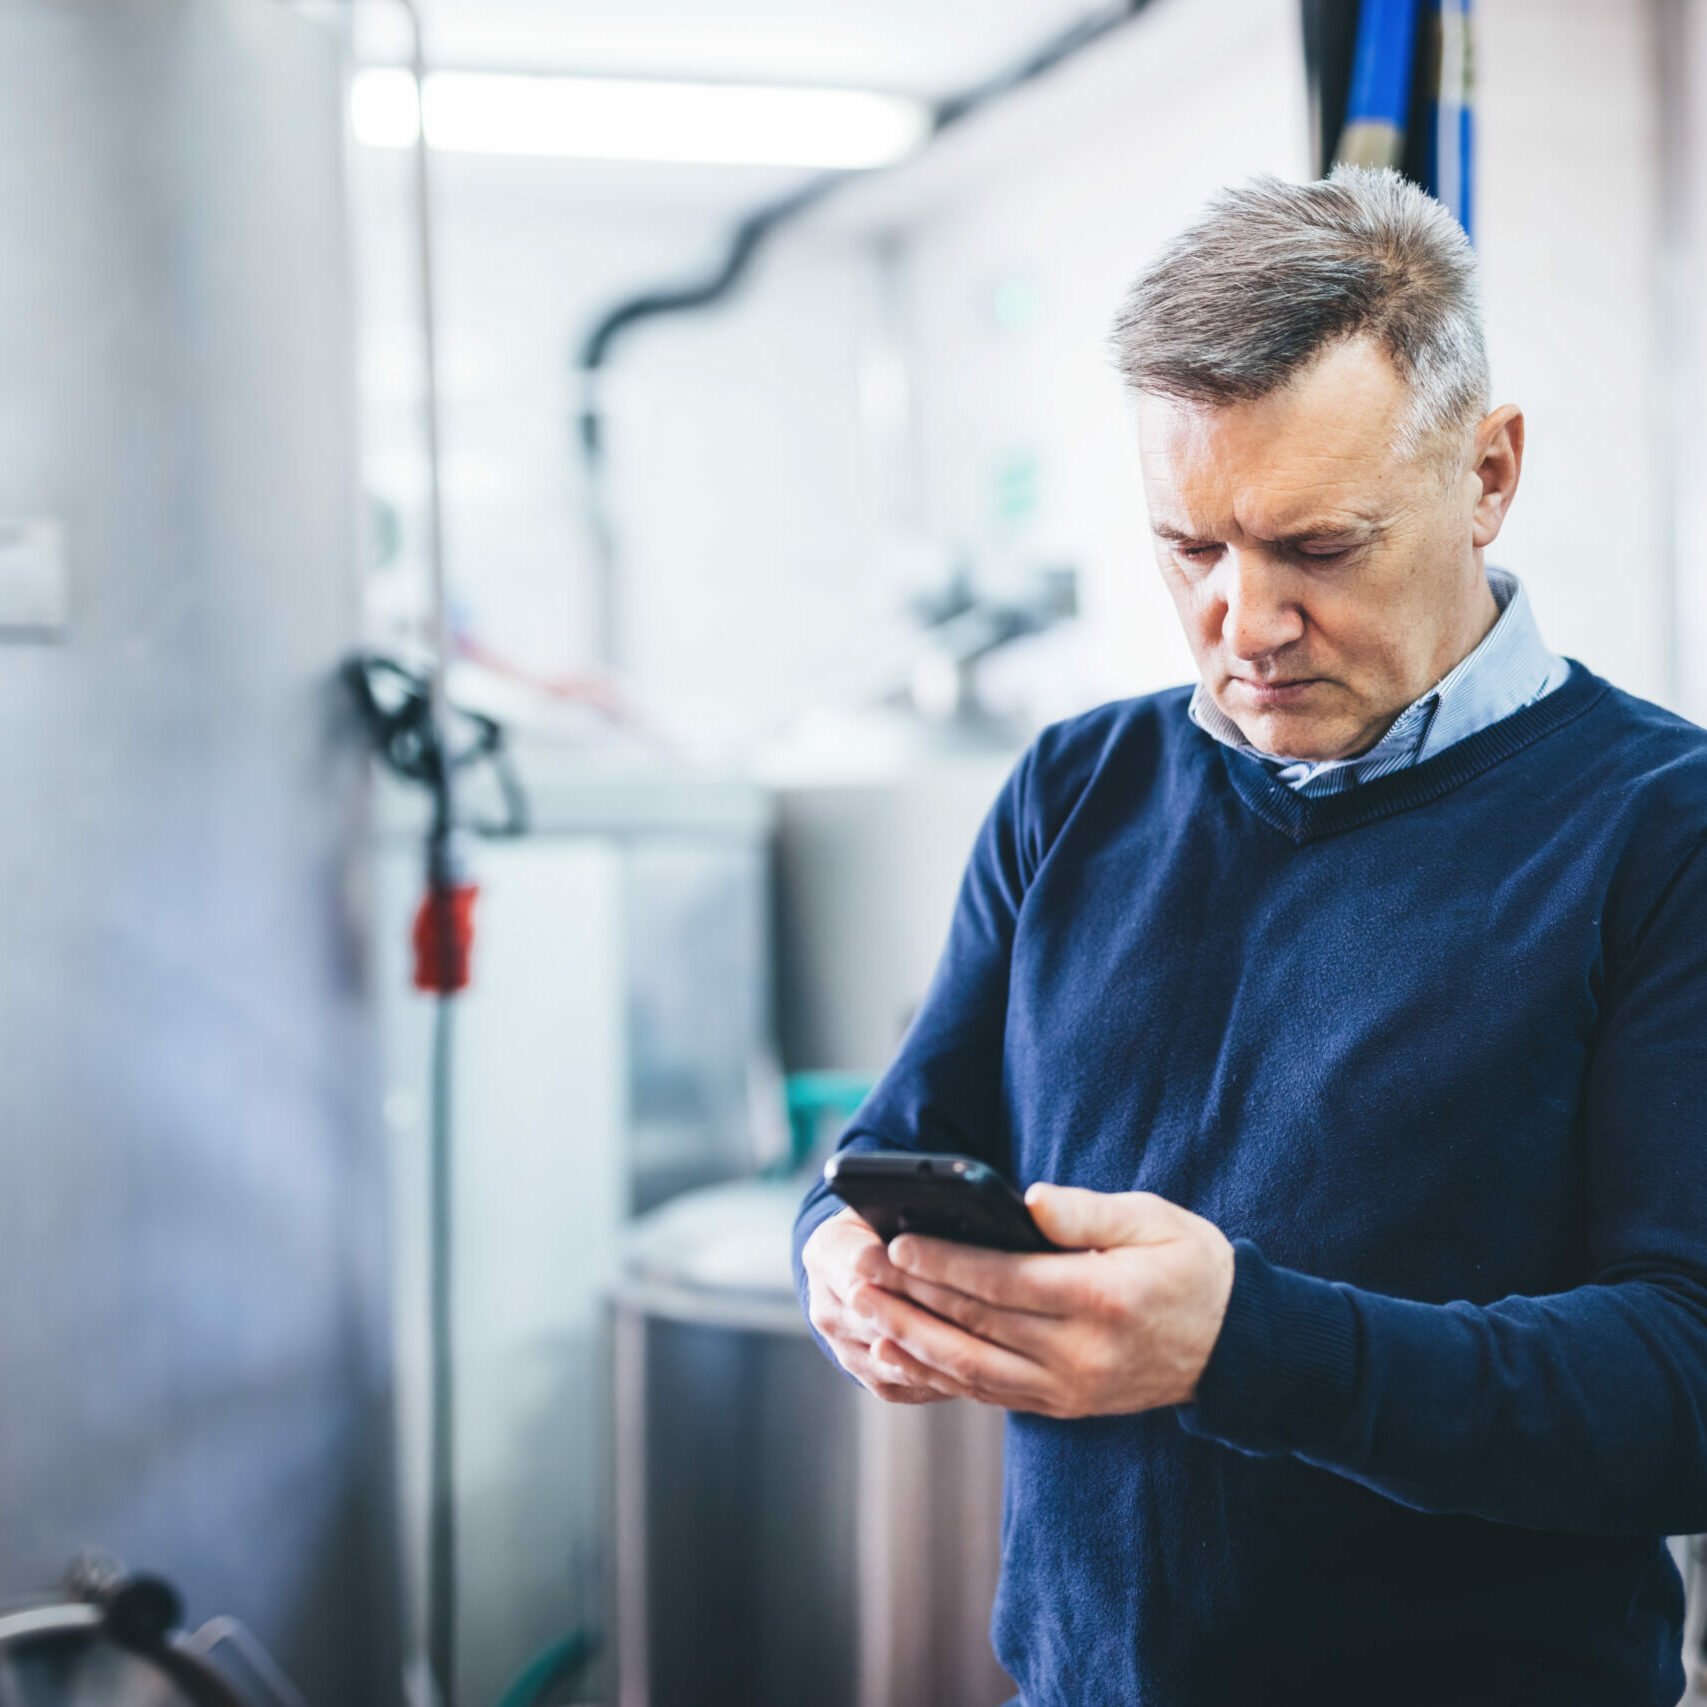 Craft brewery owner or manager talking on mobile phone doing business